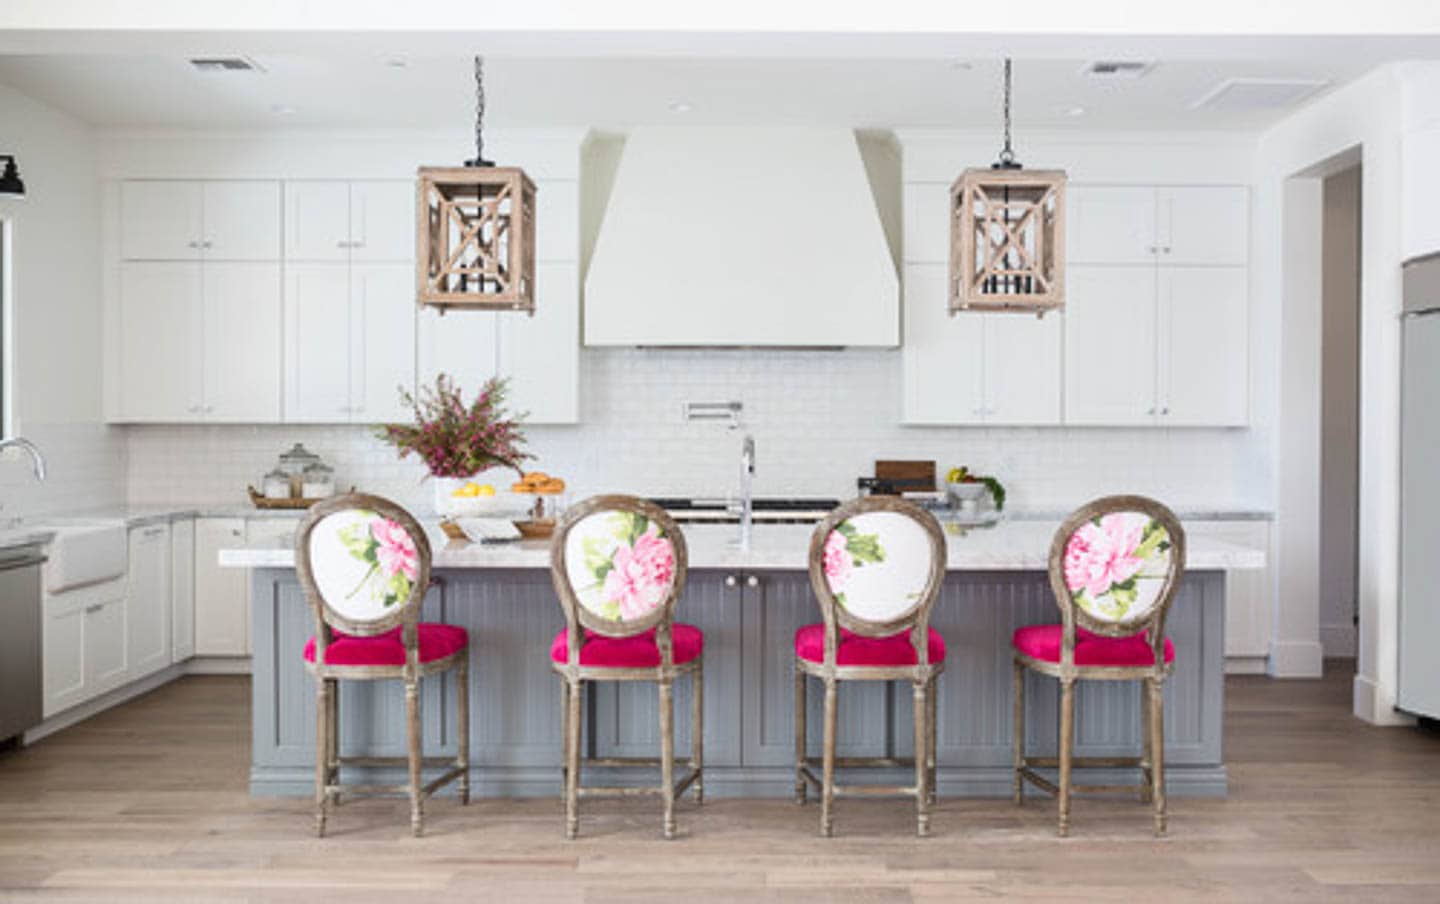 Gray and white kitchen with chairs upholstered in pink fabric